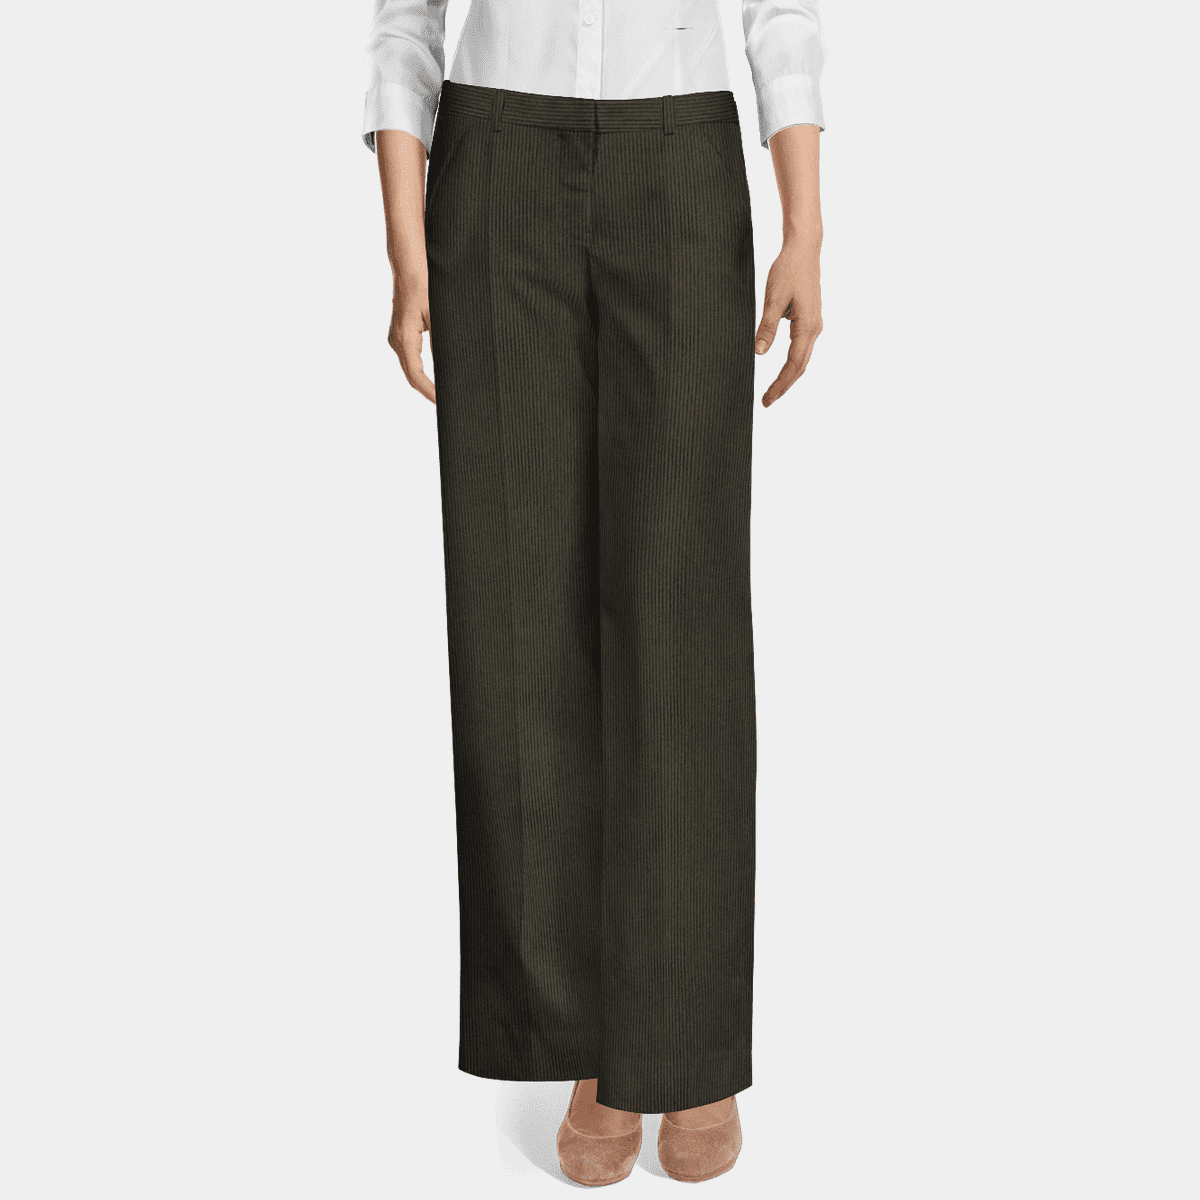 Beige high waisted flat-front stretch Wide leg Pants